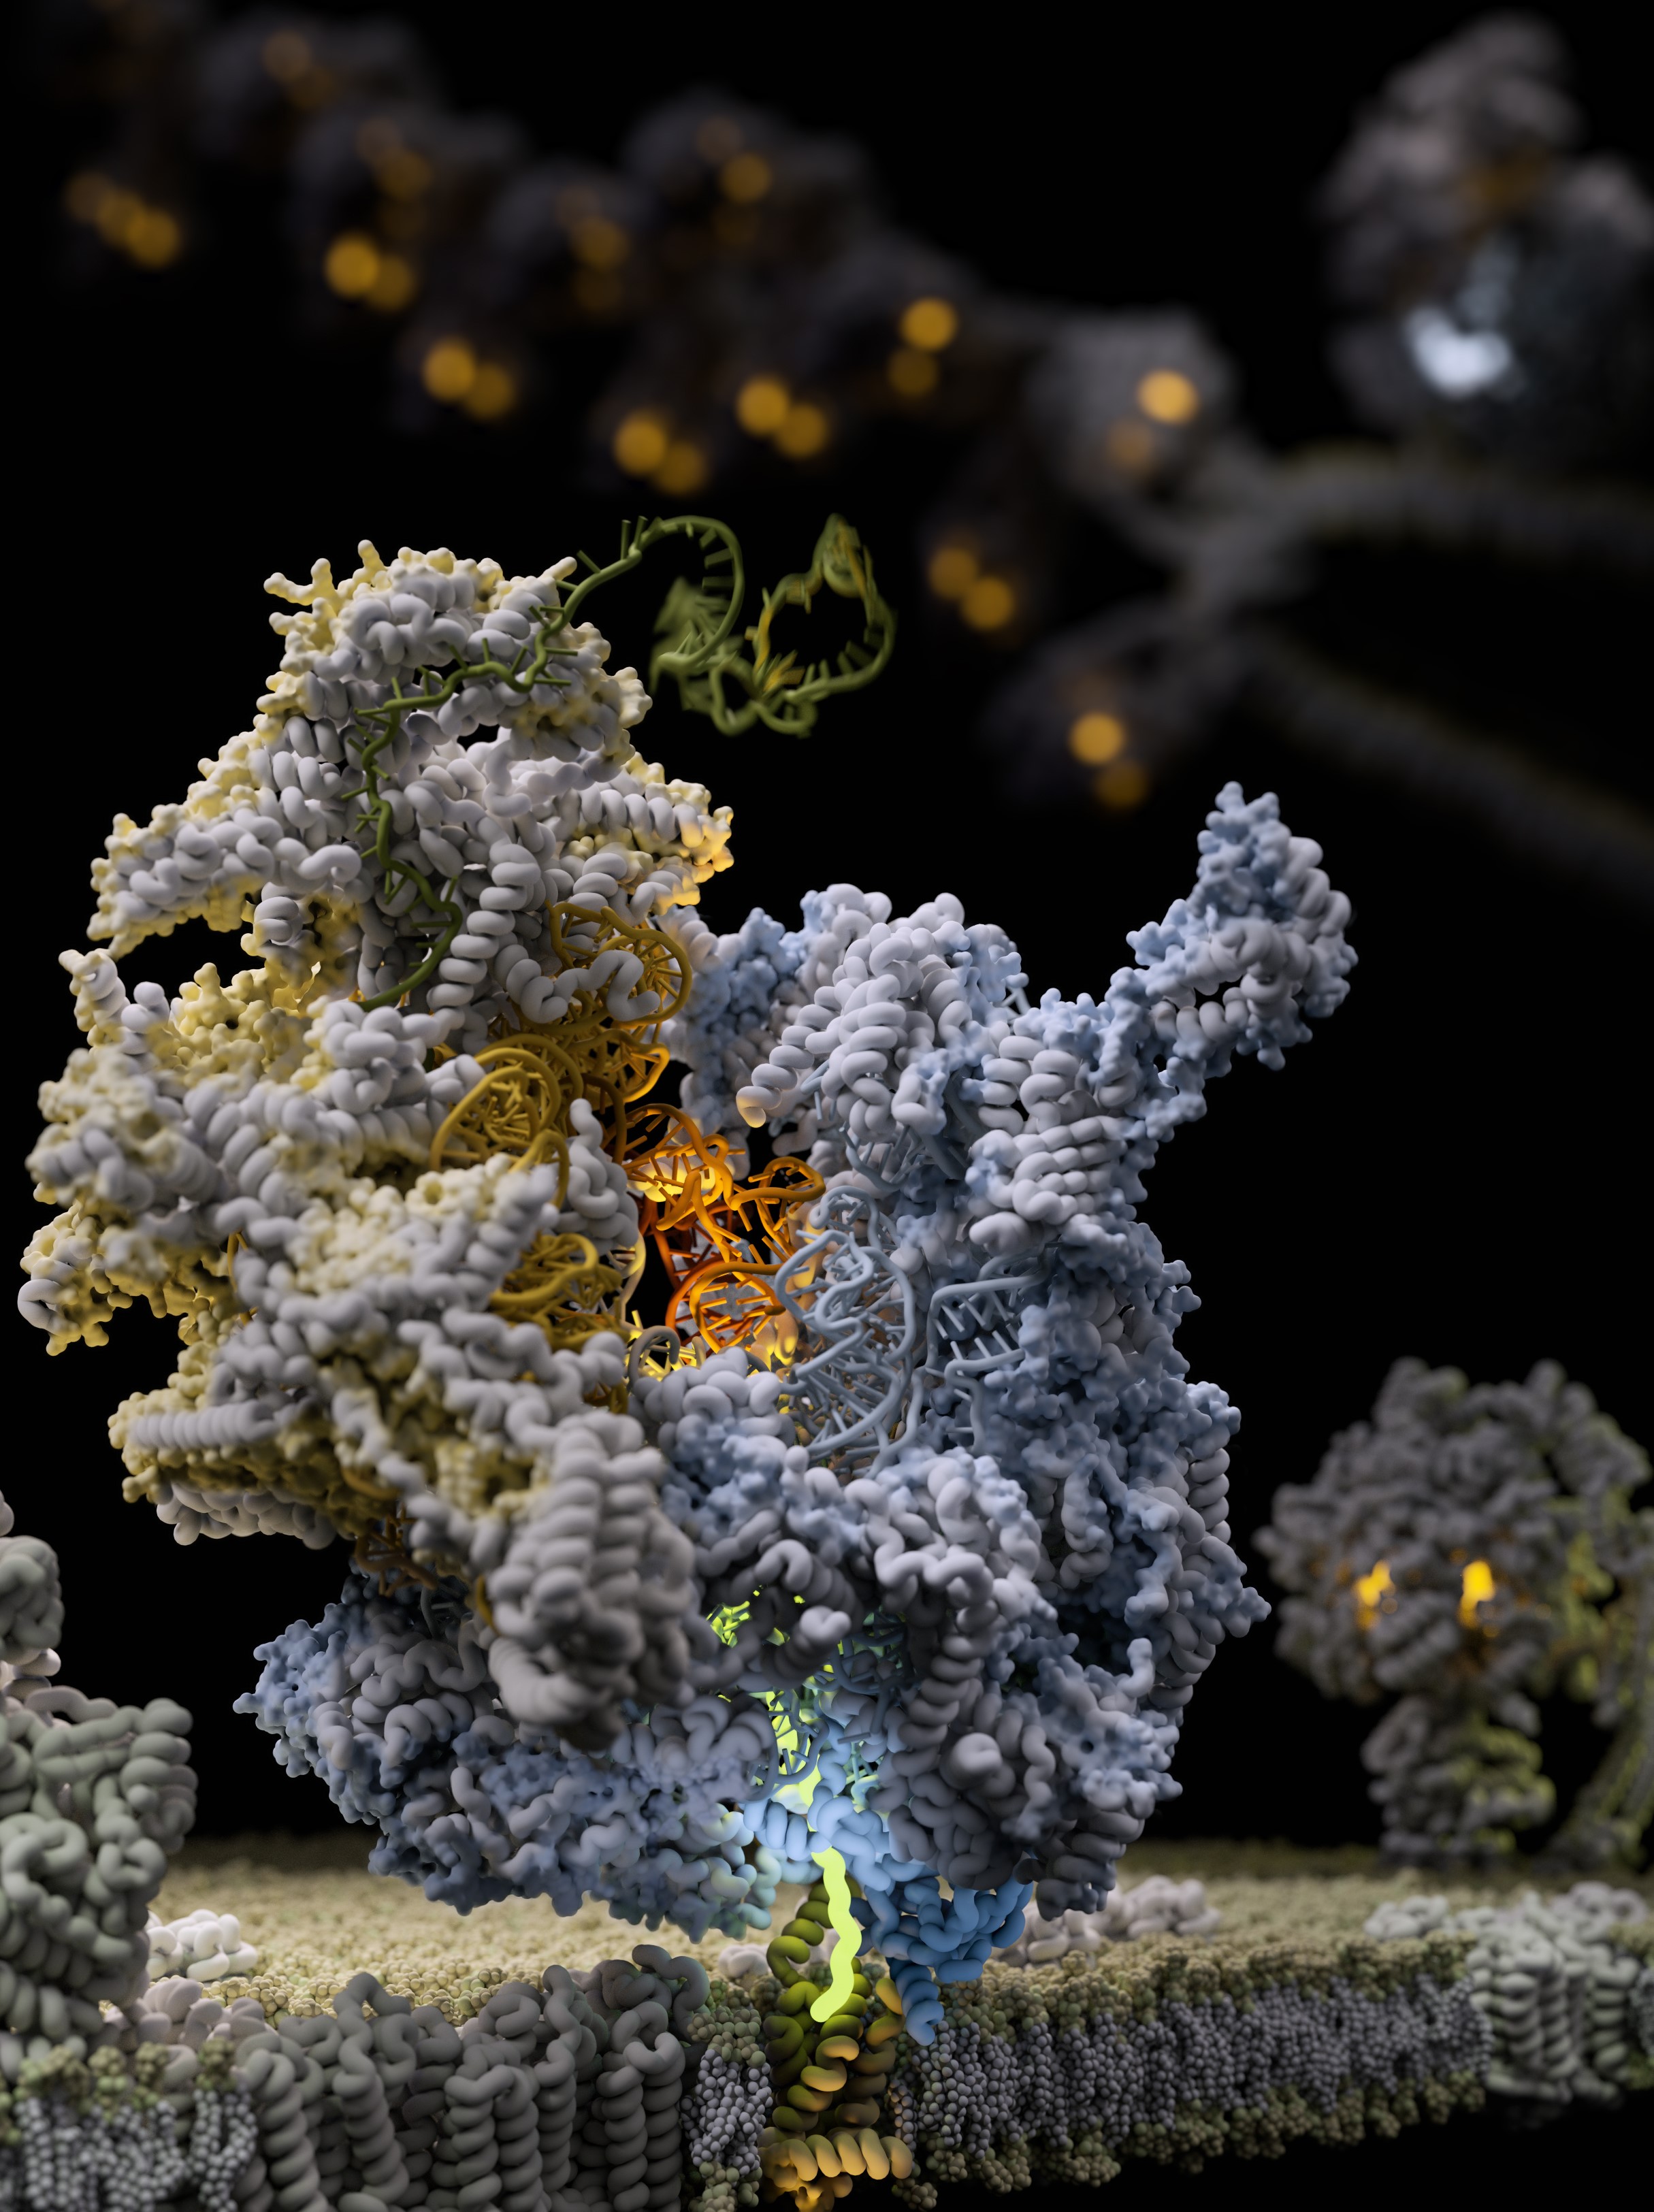 The mitoribosome is attached to its membrane adaptor as it synthesises a bioenergetic protein (glow yellow). Image: Dan W. Nowakowski and Alexey Amunts 